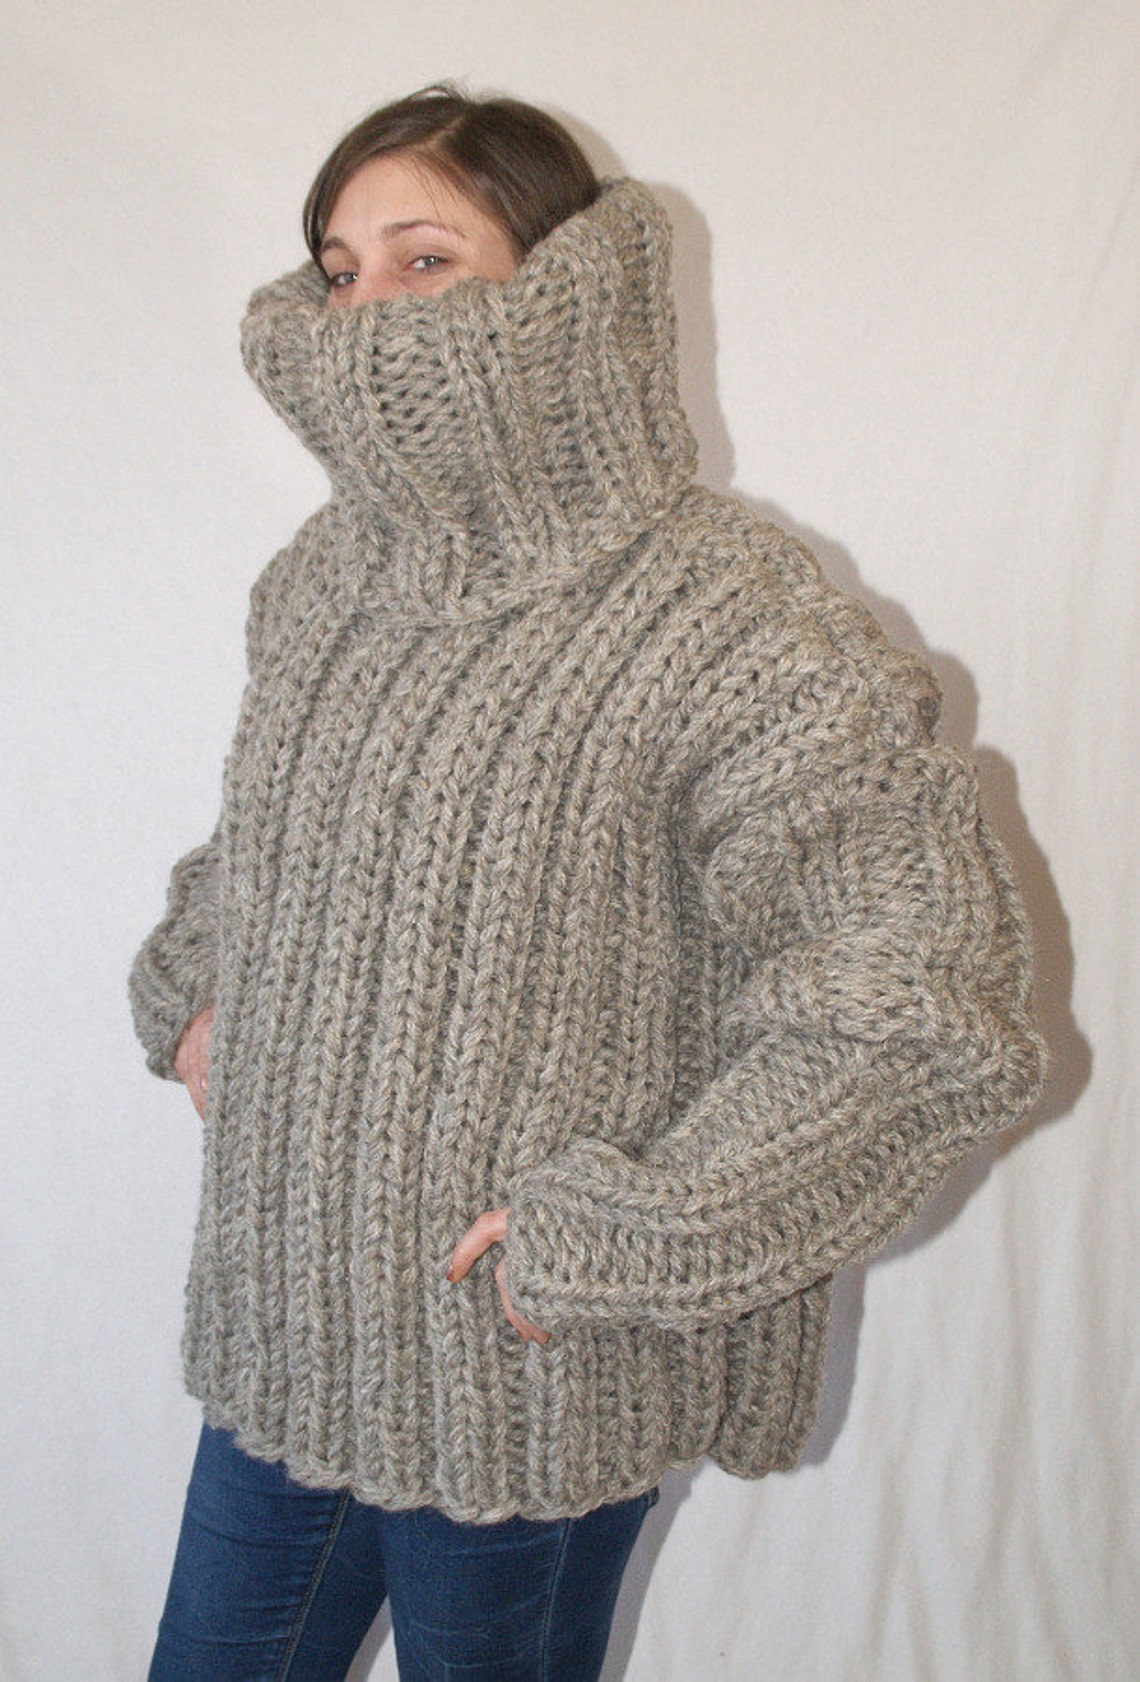 3 Kg Turtleneck Sweater Itchy Scratchy Thick Knit Chunky Mens - Etsy